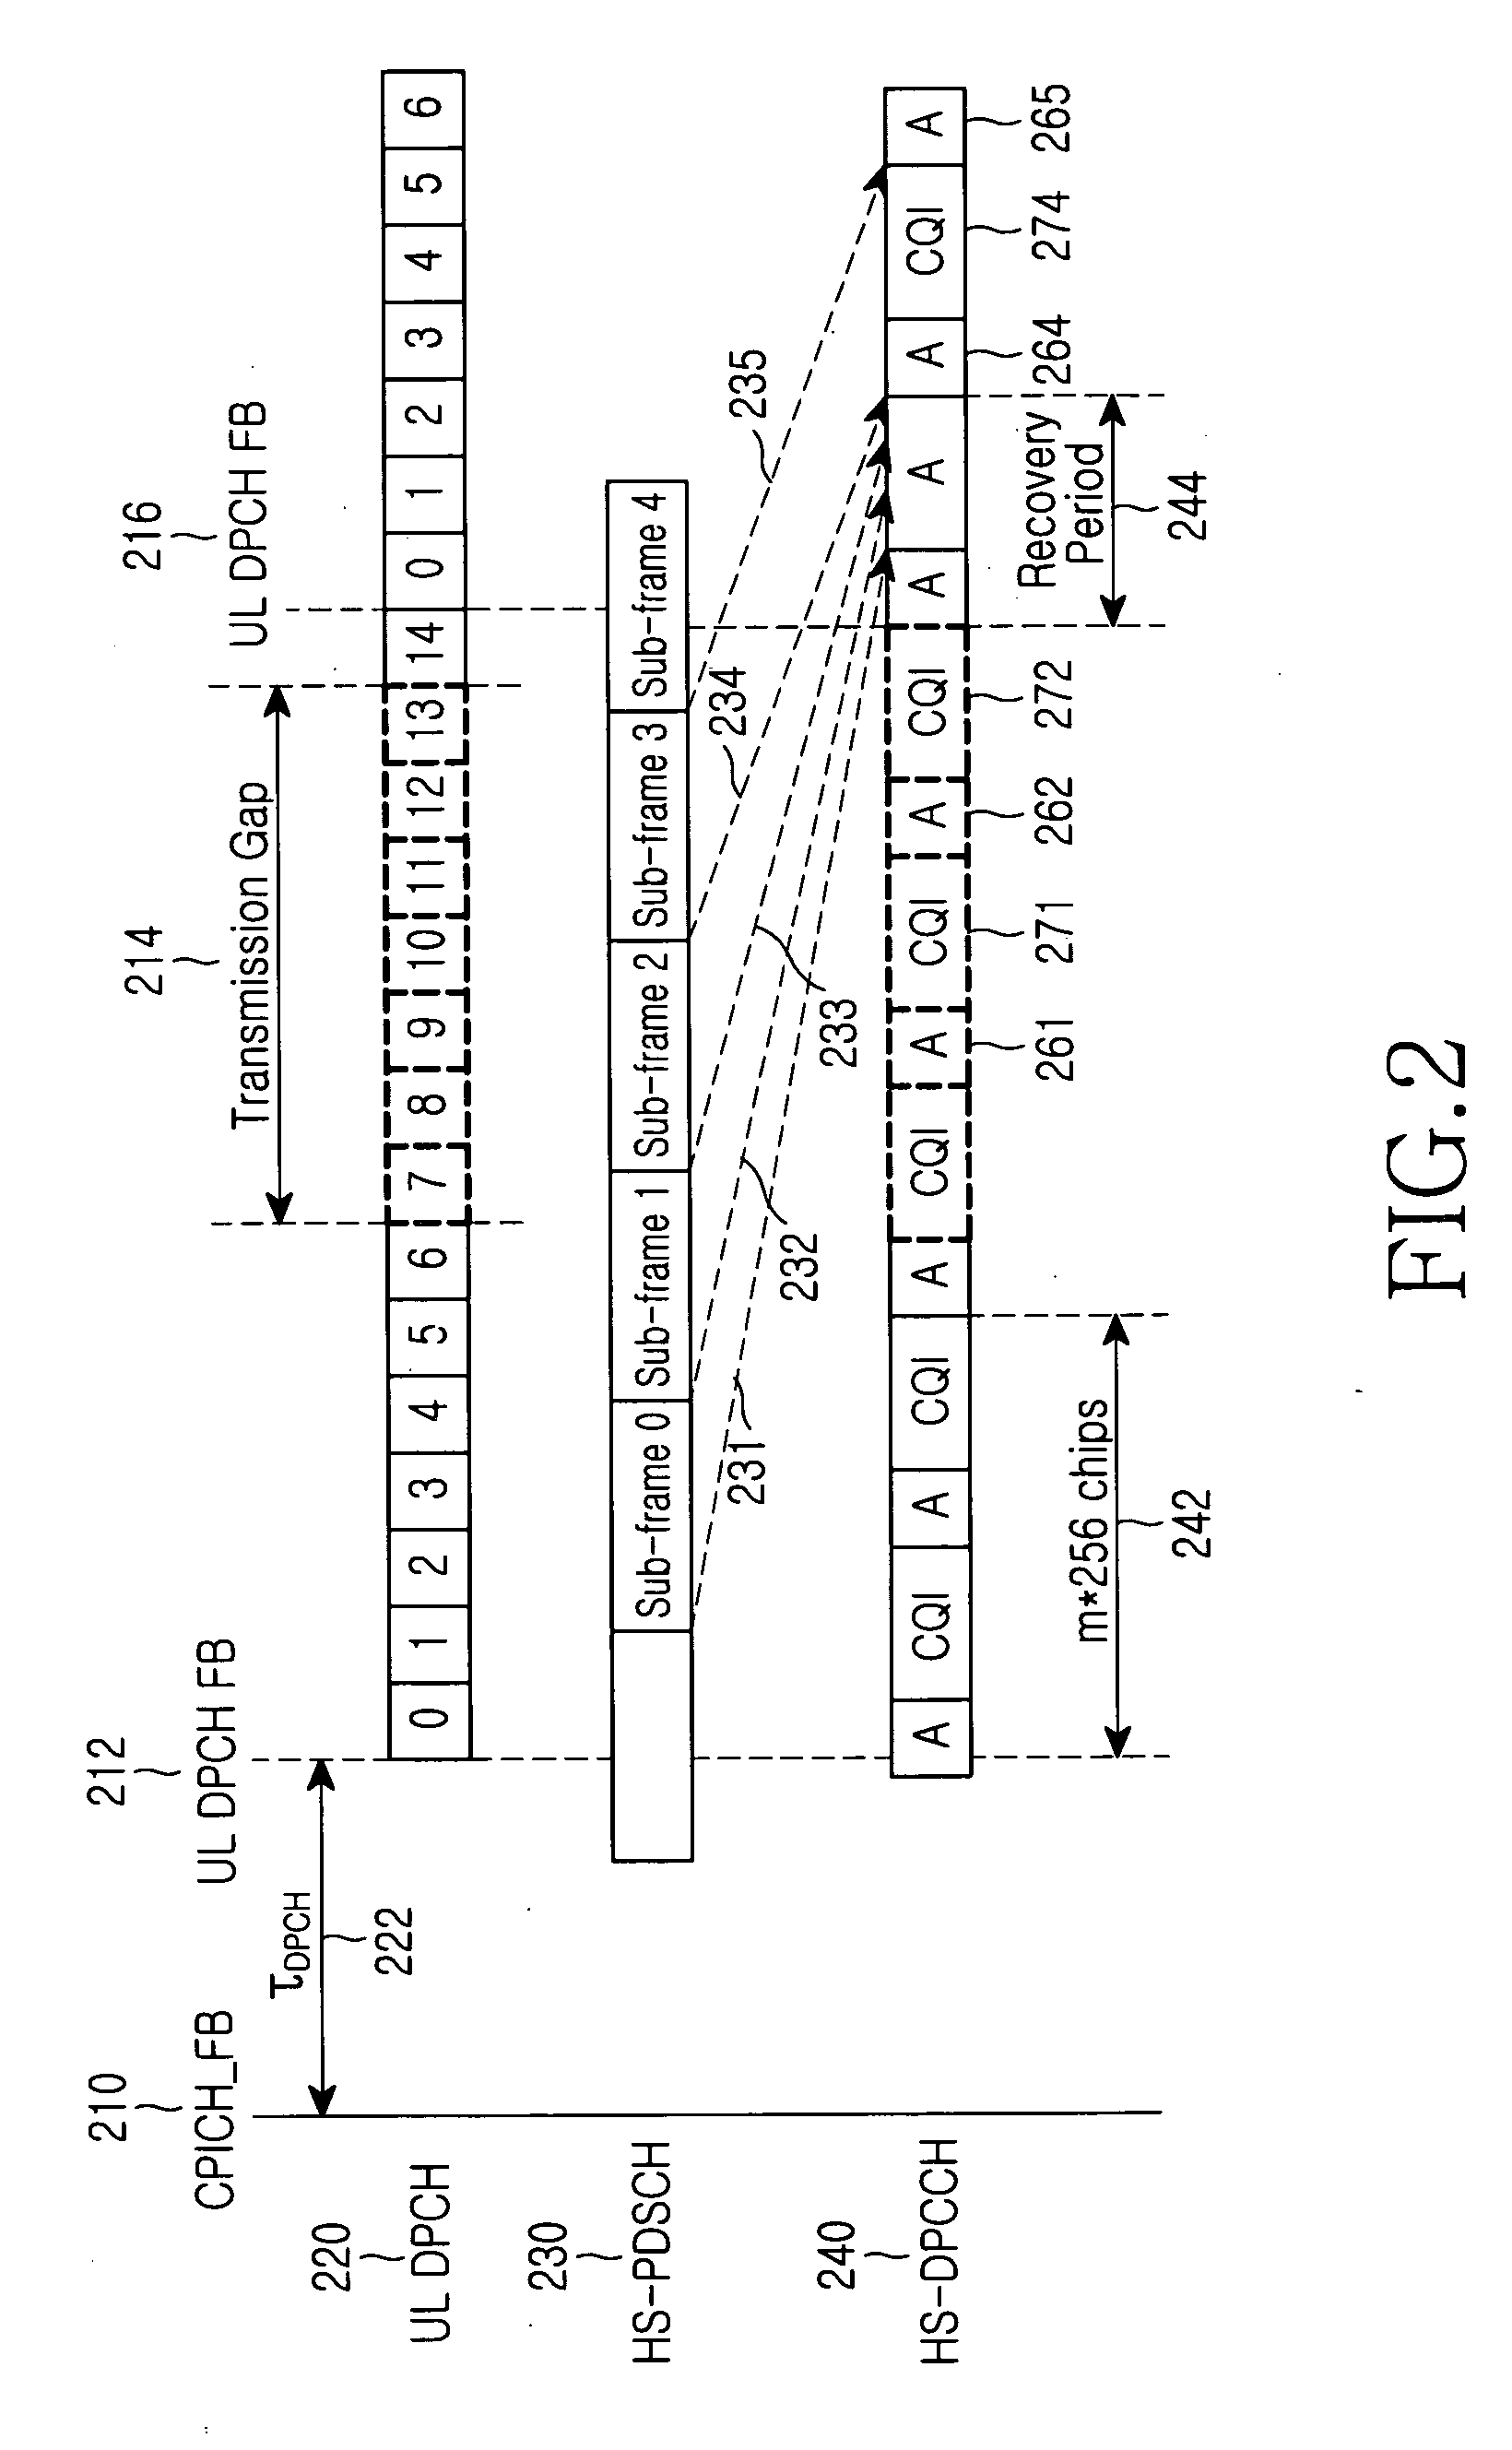 Method for performing compressed mode-based HARQ in a mobile communication system supporting HSDPA